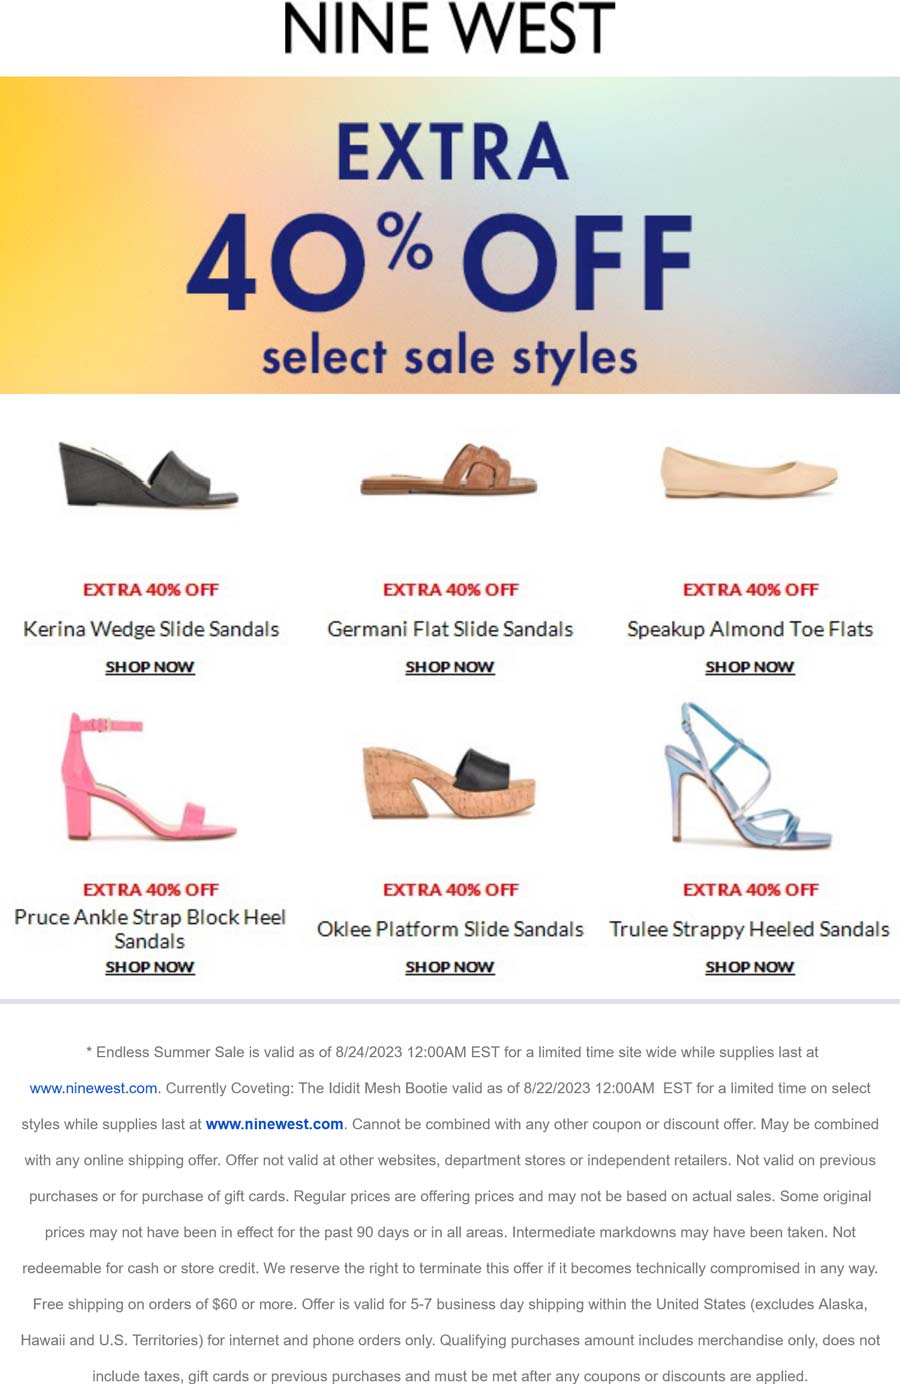 Nine West stores Coupon  Extra 40% off sale styles at Nine West #ninewest 